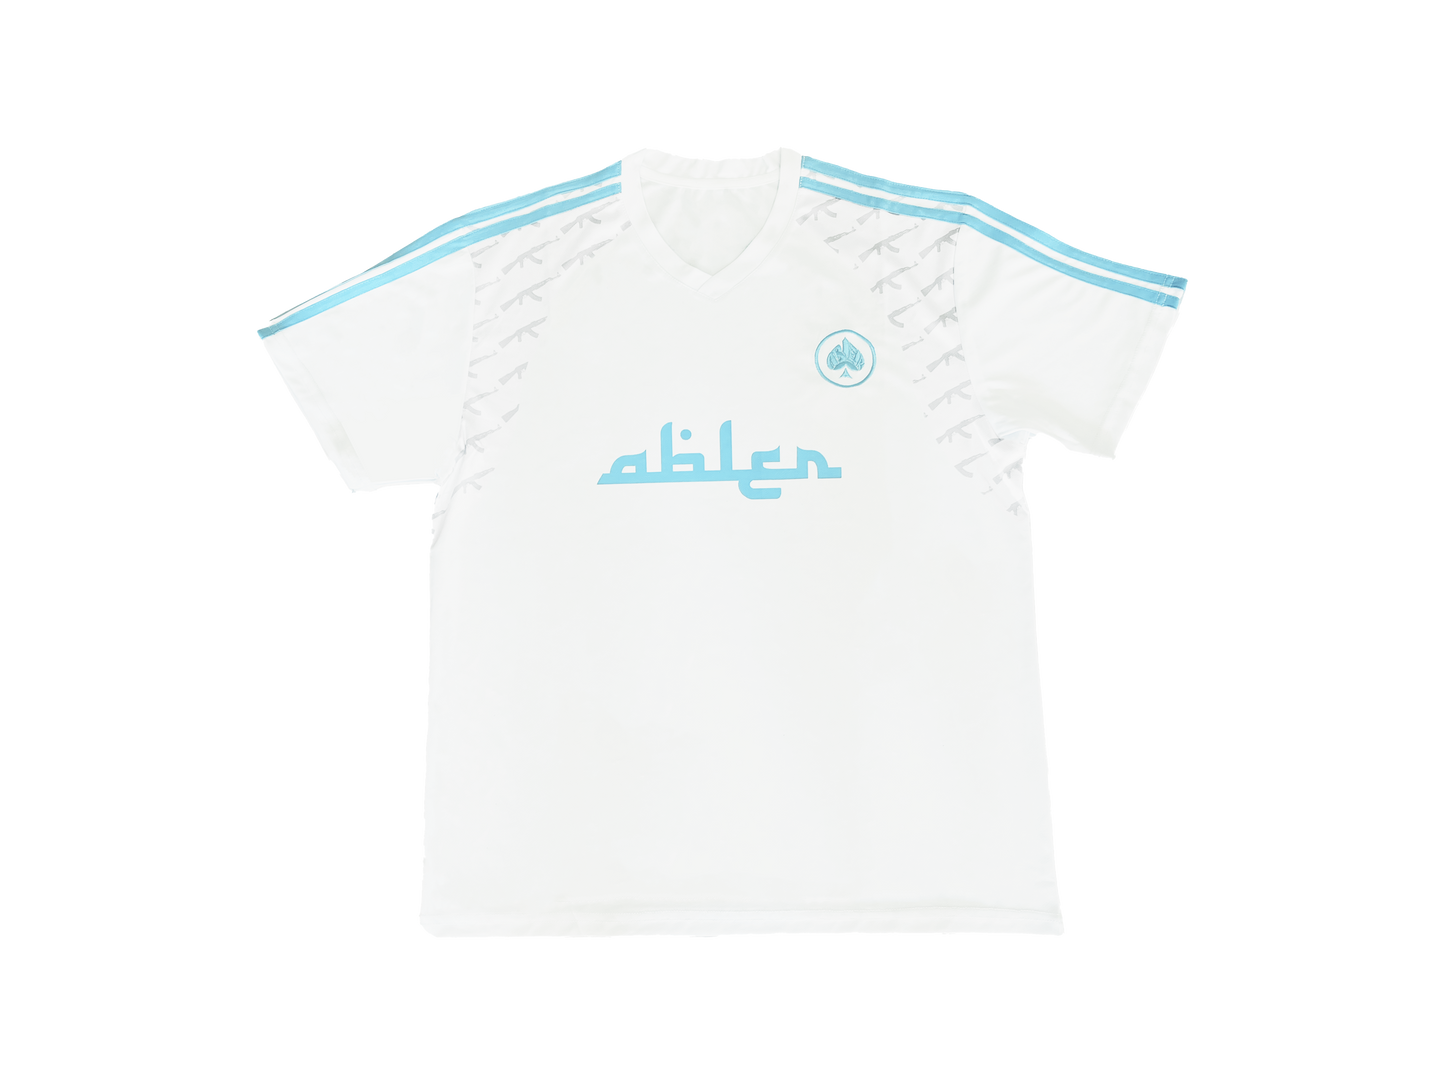 Football Shirt - White & Blue - Abler Atelier Exclusive